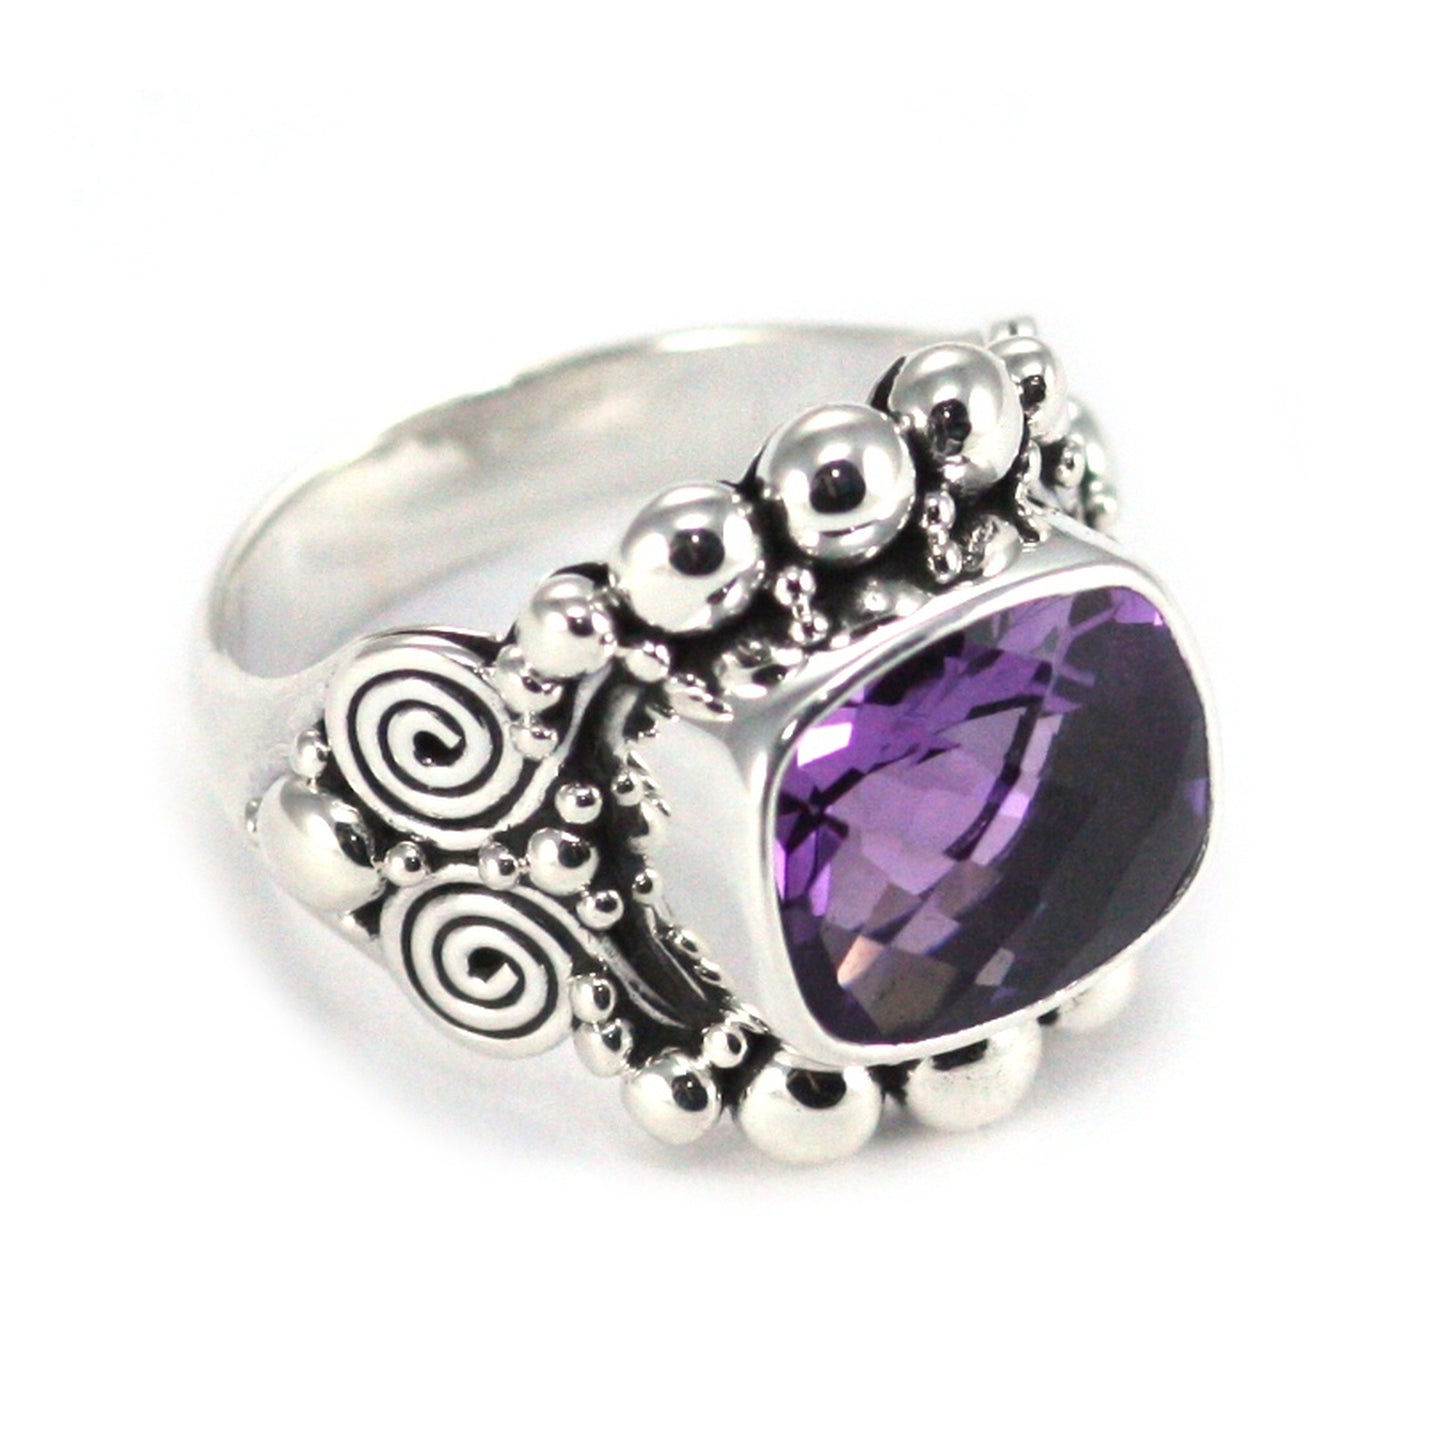 R140AM PADMA .925 Sterling Silver Ring With 10x12mm Amethyst Stone